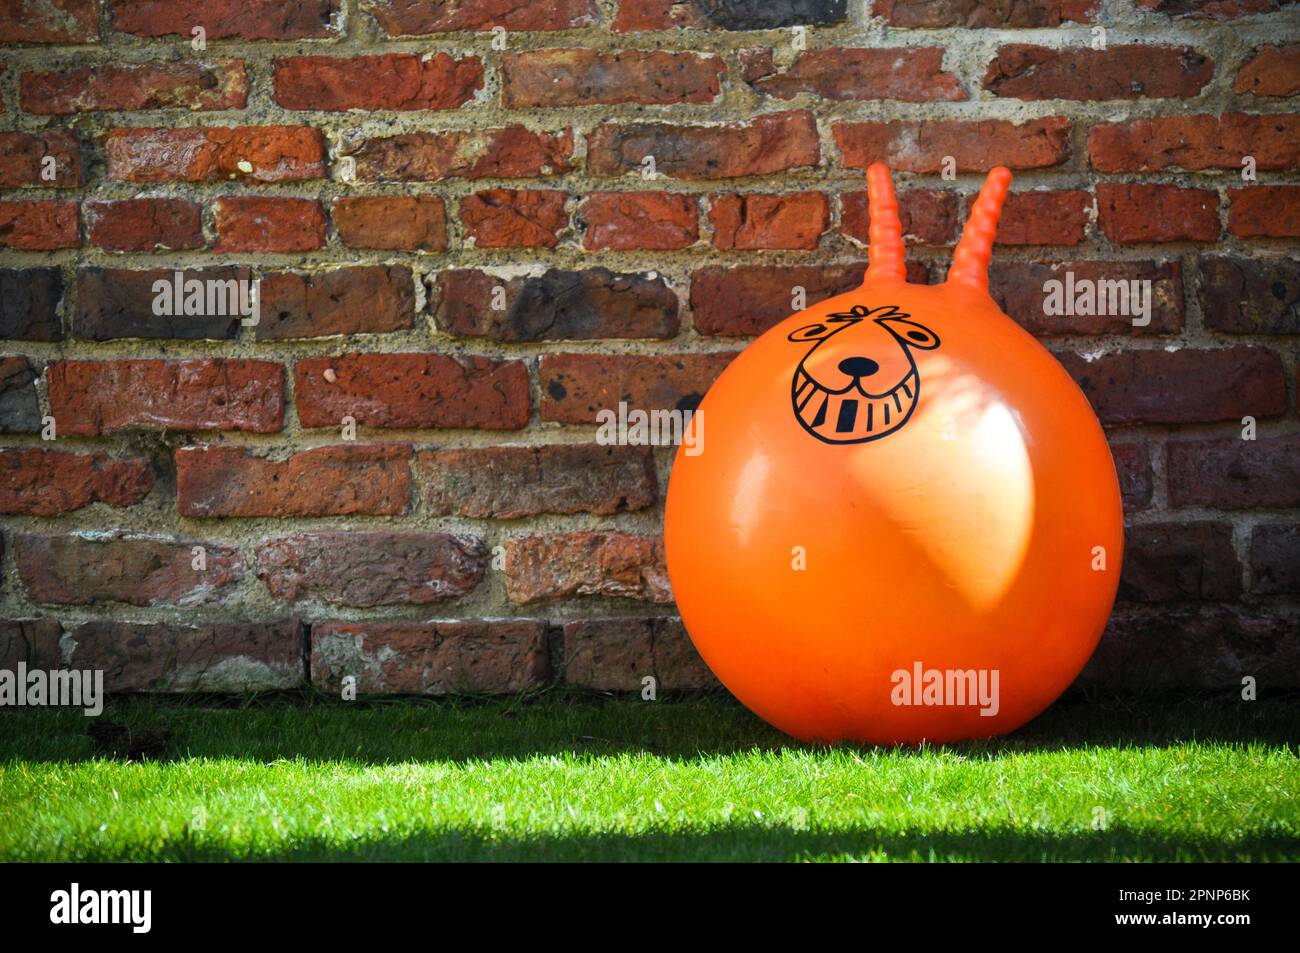 An orange space hopper toy propped against a rustic brick wall with copy space to the side Stock Photo